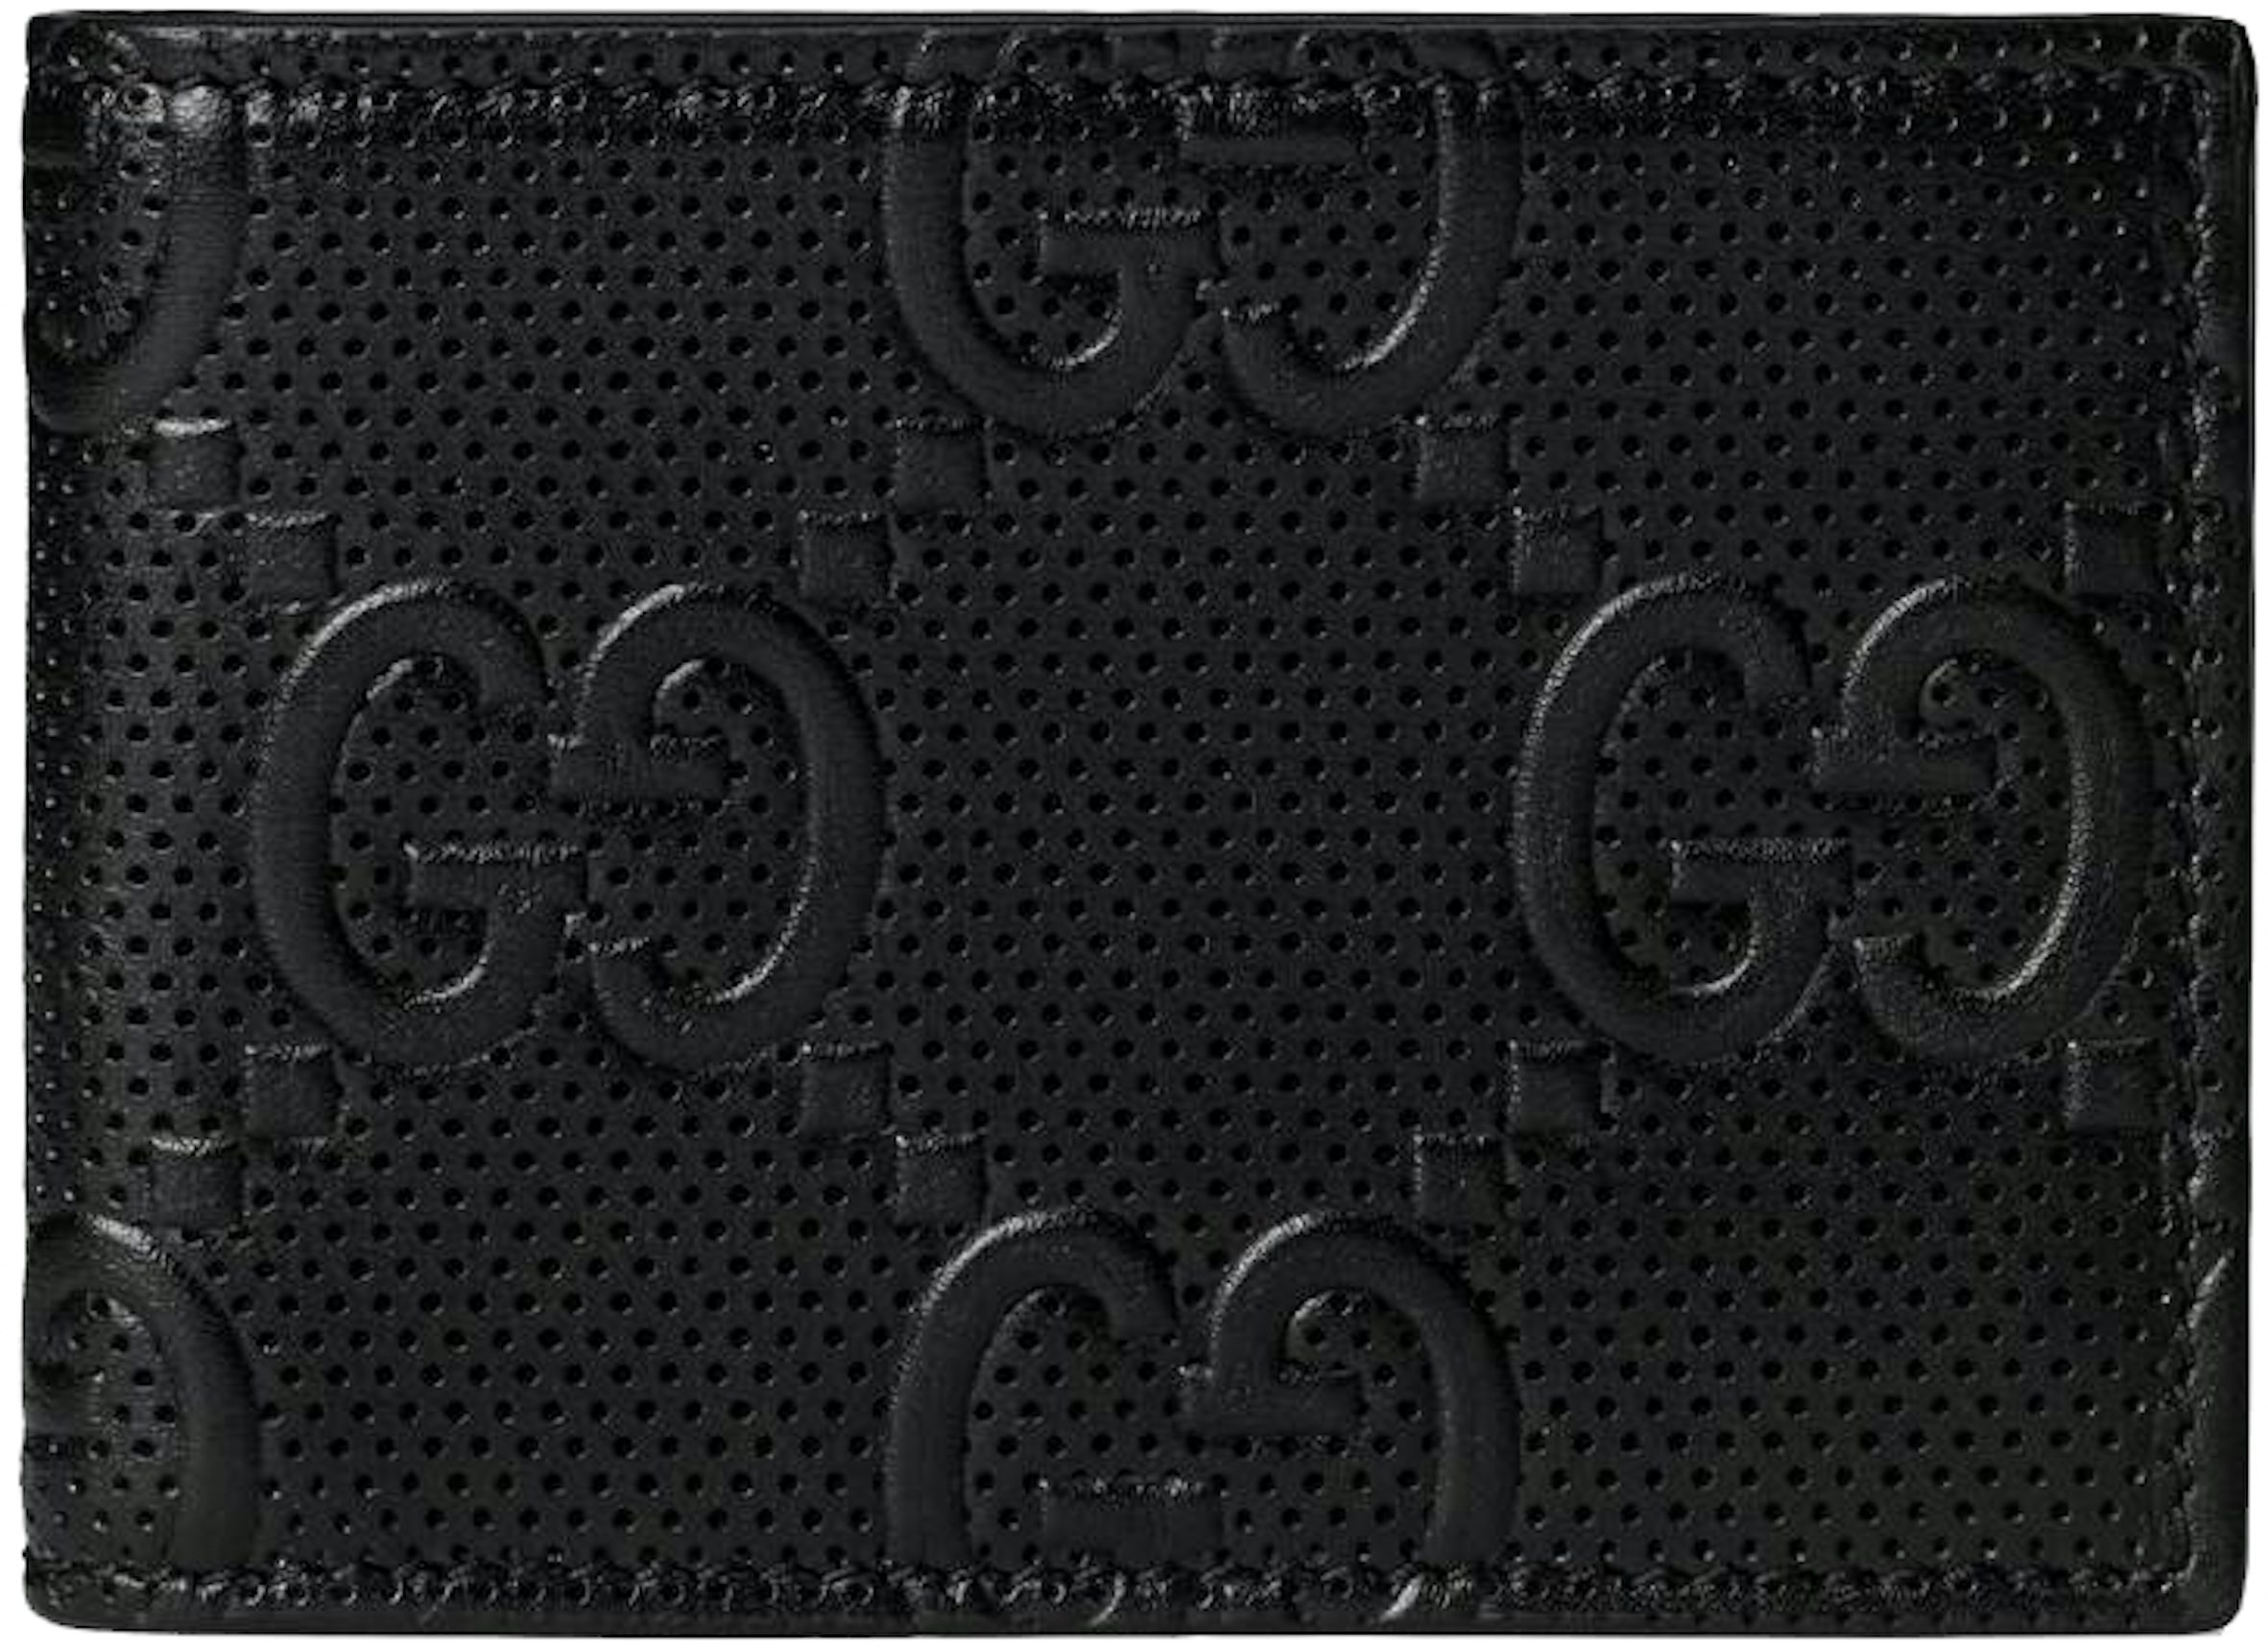 Givenchy Star Embossed leather Billfold Wallet $550 100% Authentic